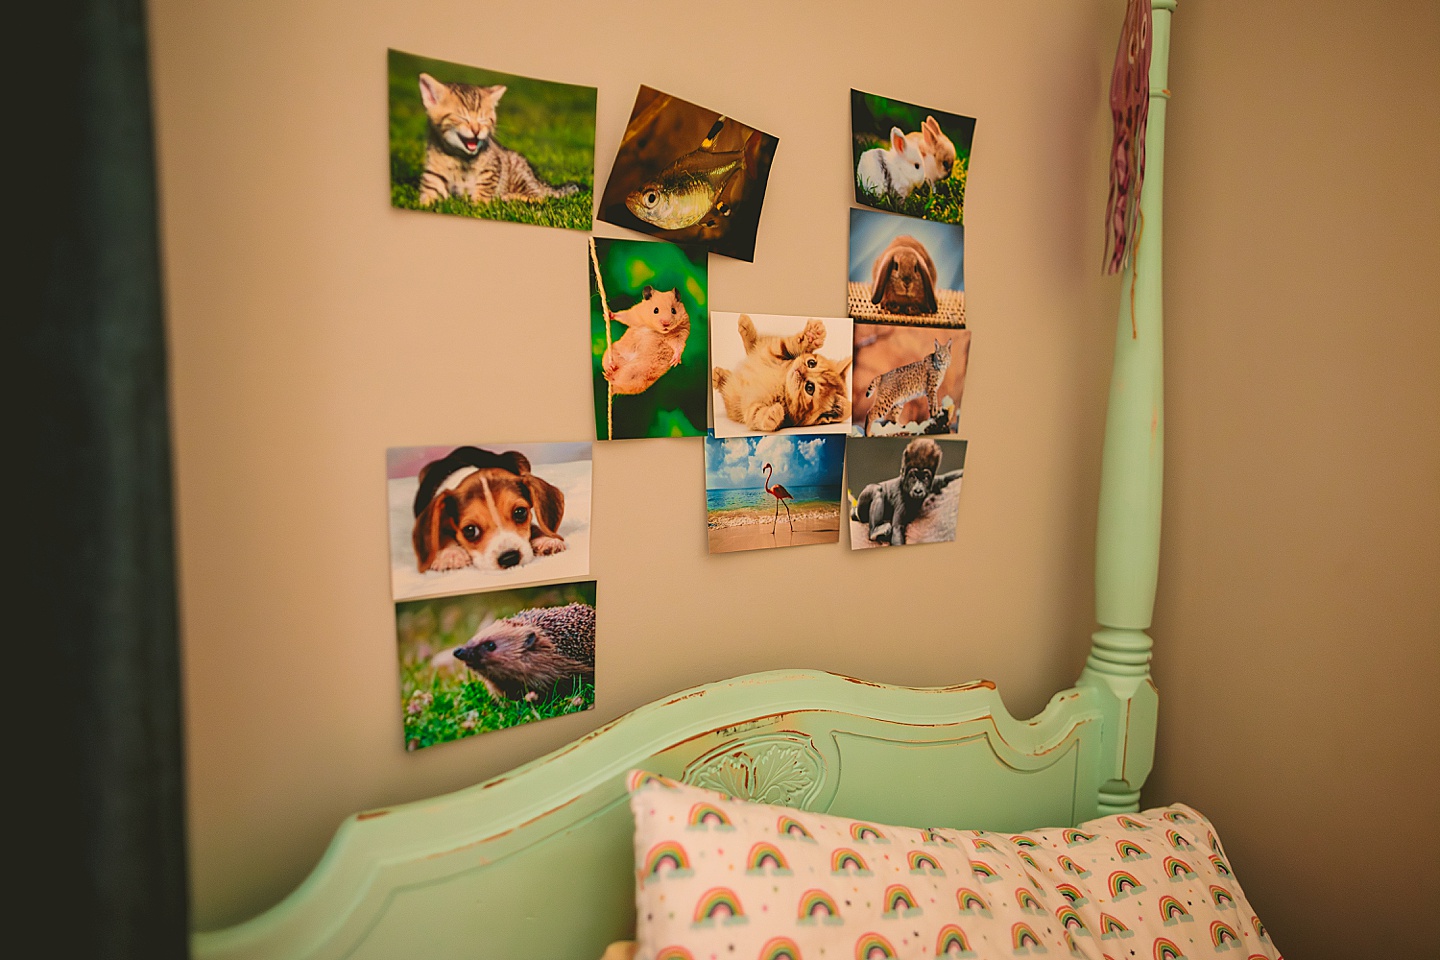 Pictures of animals hanging on wall